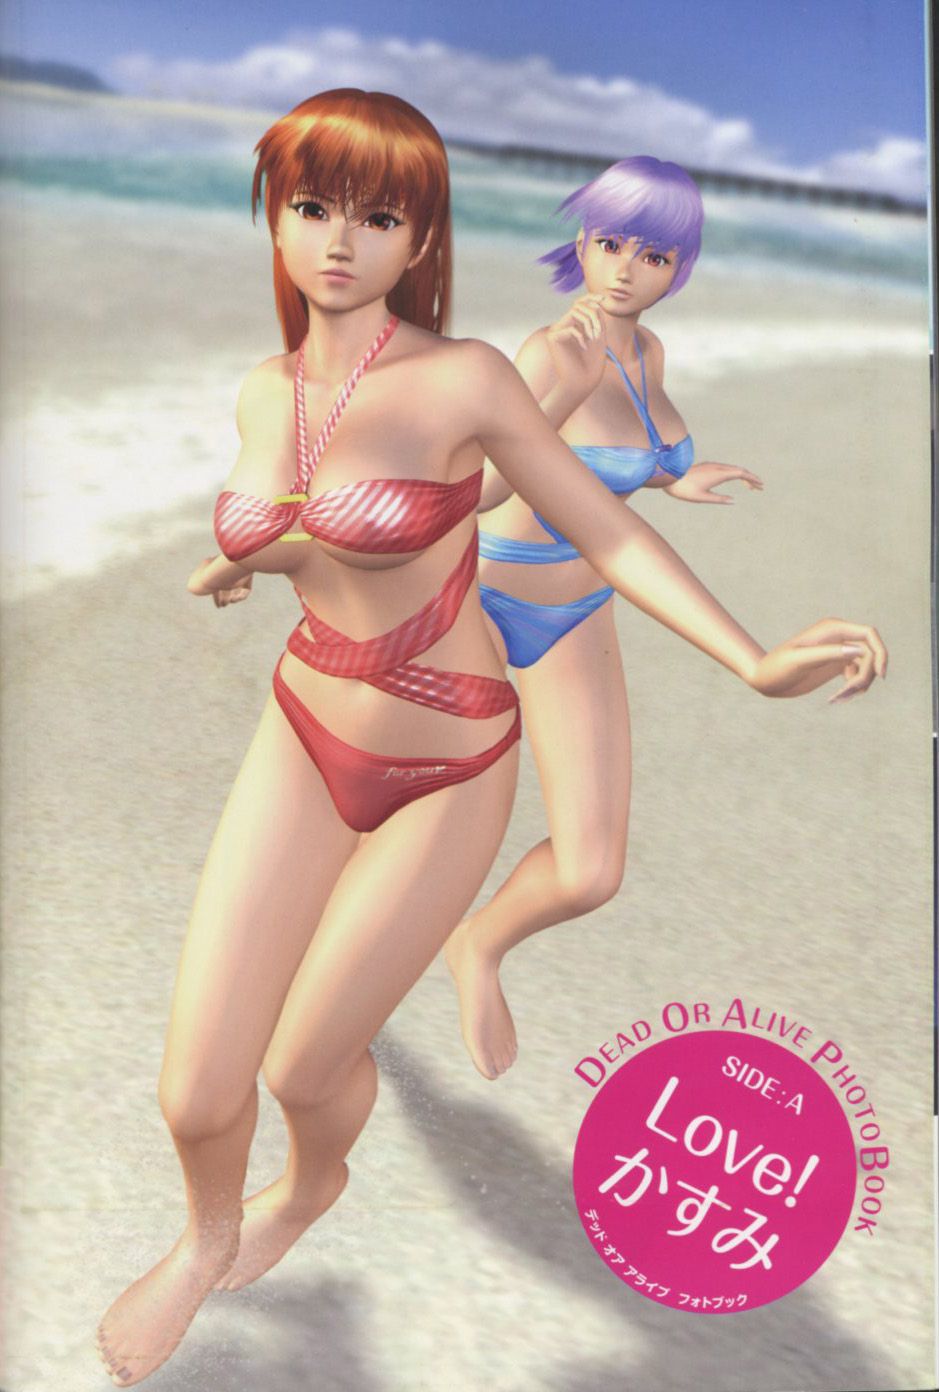 Dead or Alive Photobook Side A Love Kasumi [畫集] Dead or Alive Photobook Side A Love Kasumi 3